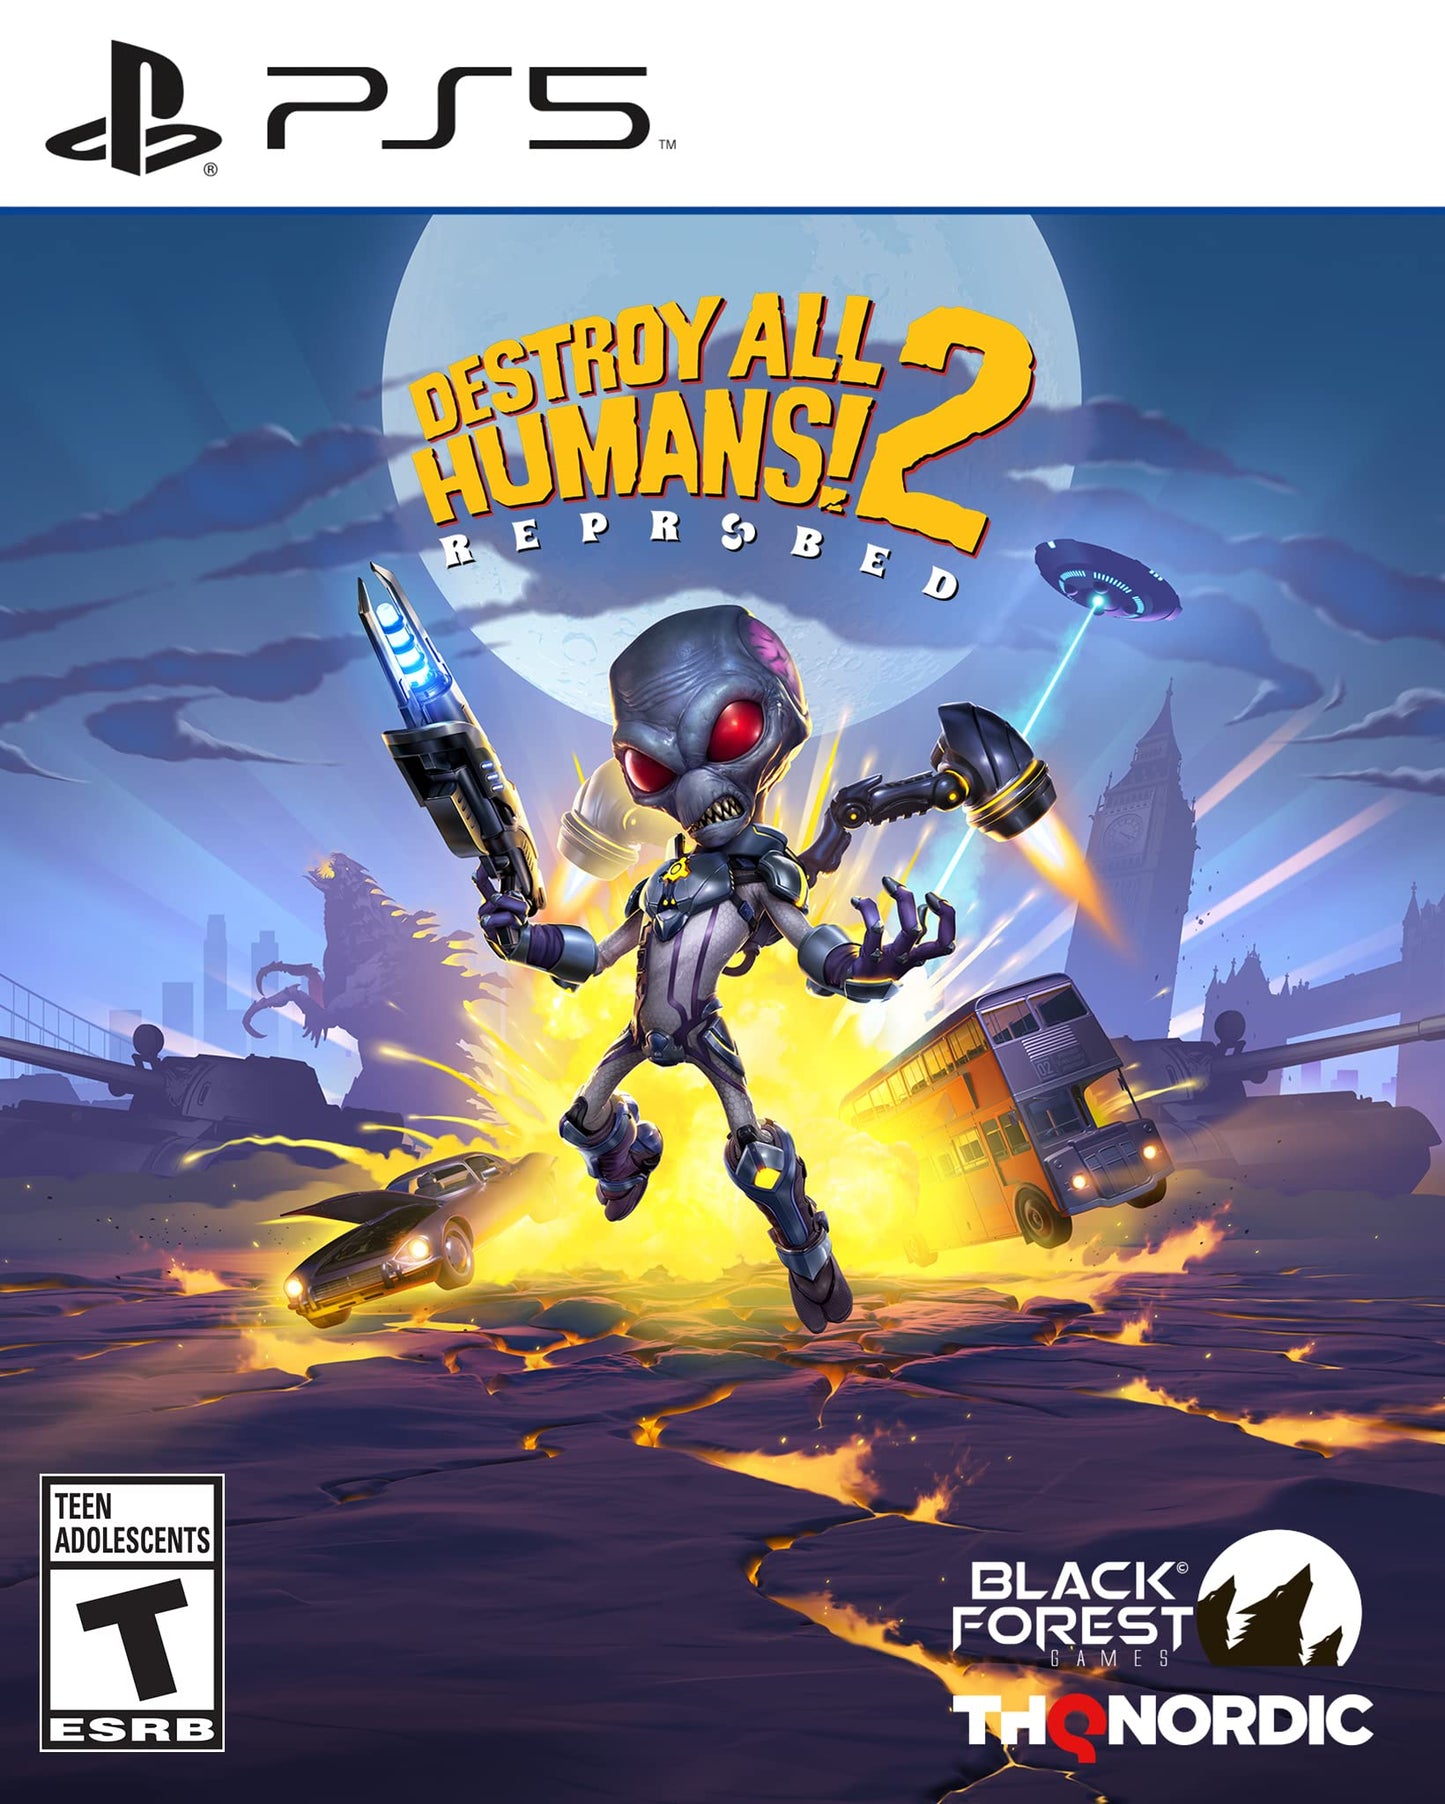 Destroy All Humans! 2 Reprobed by Black Forest Video Game for Playstation 5 (PS5)